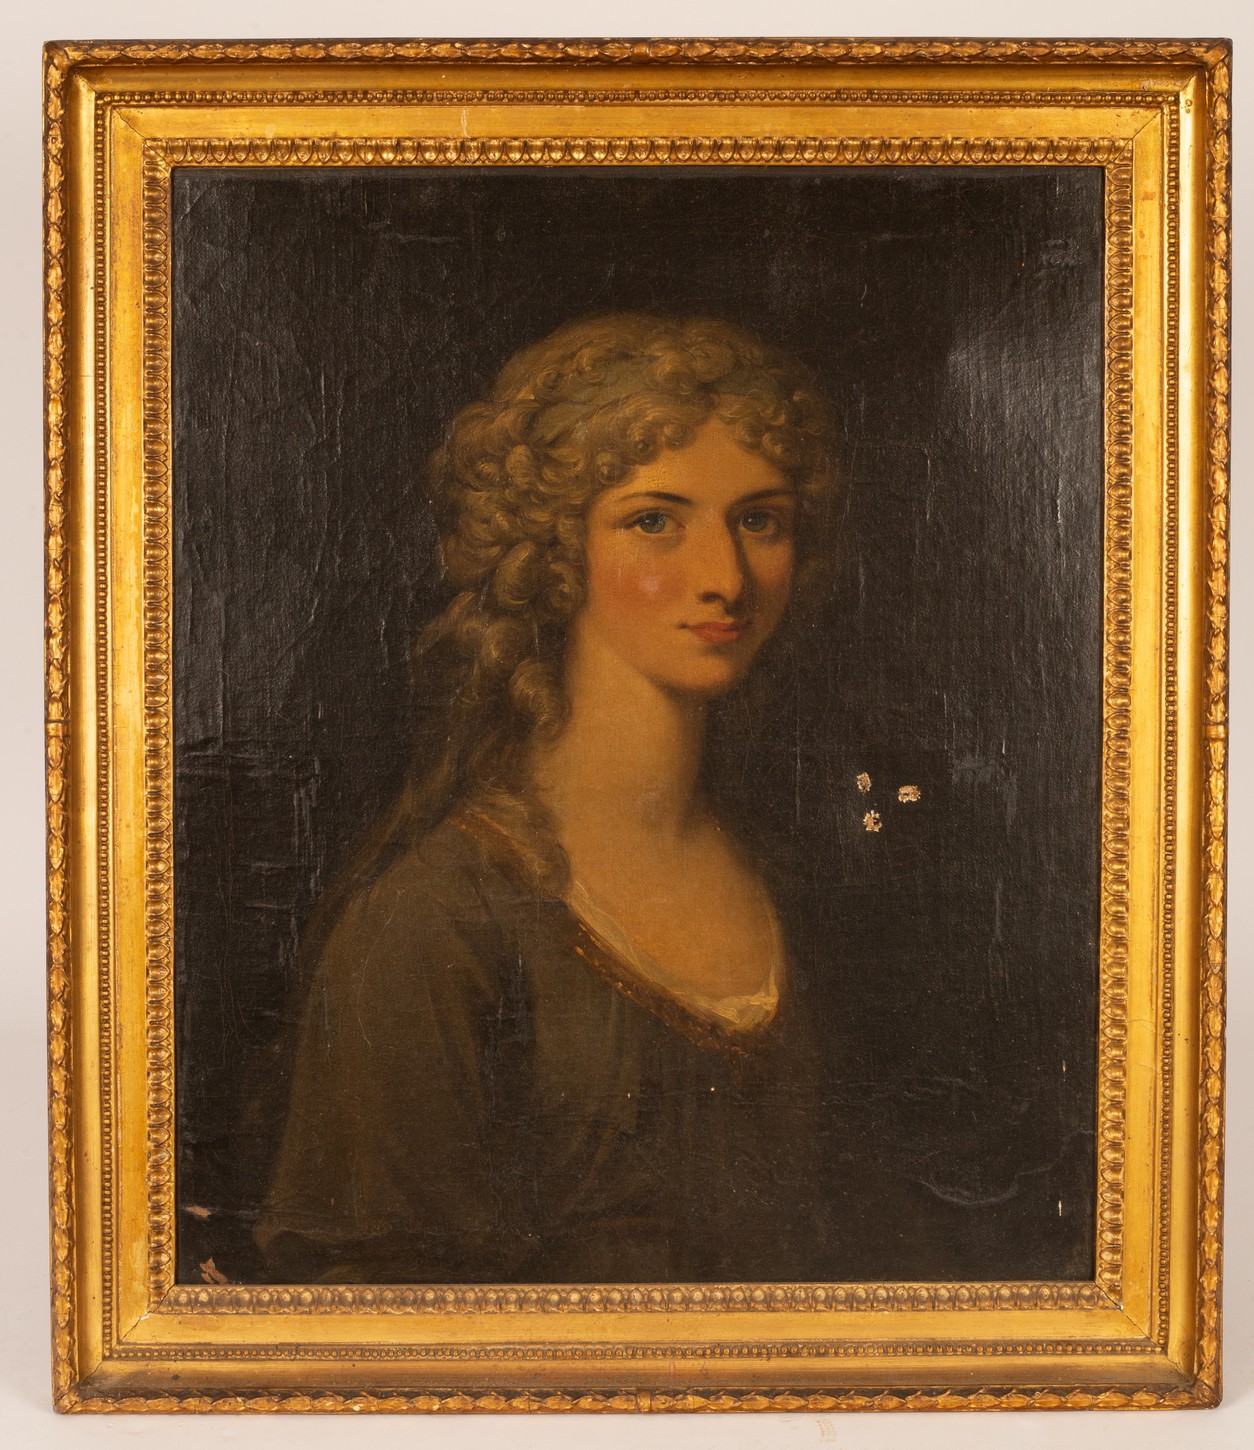 English School, 18th Century/Portrait of a Young Lady/bust length/oil on canvas, - Image 2 of 3